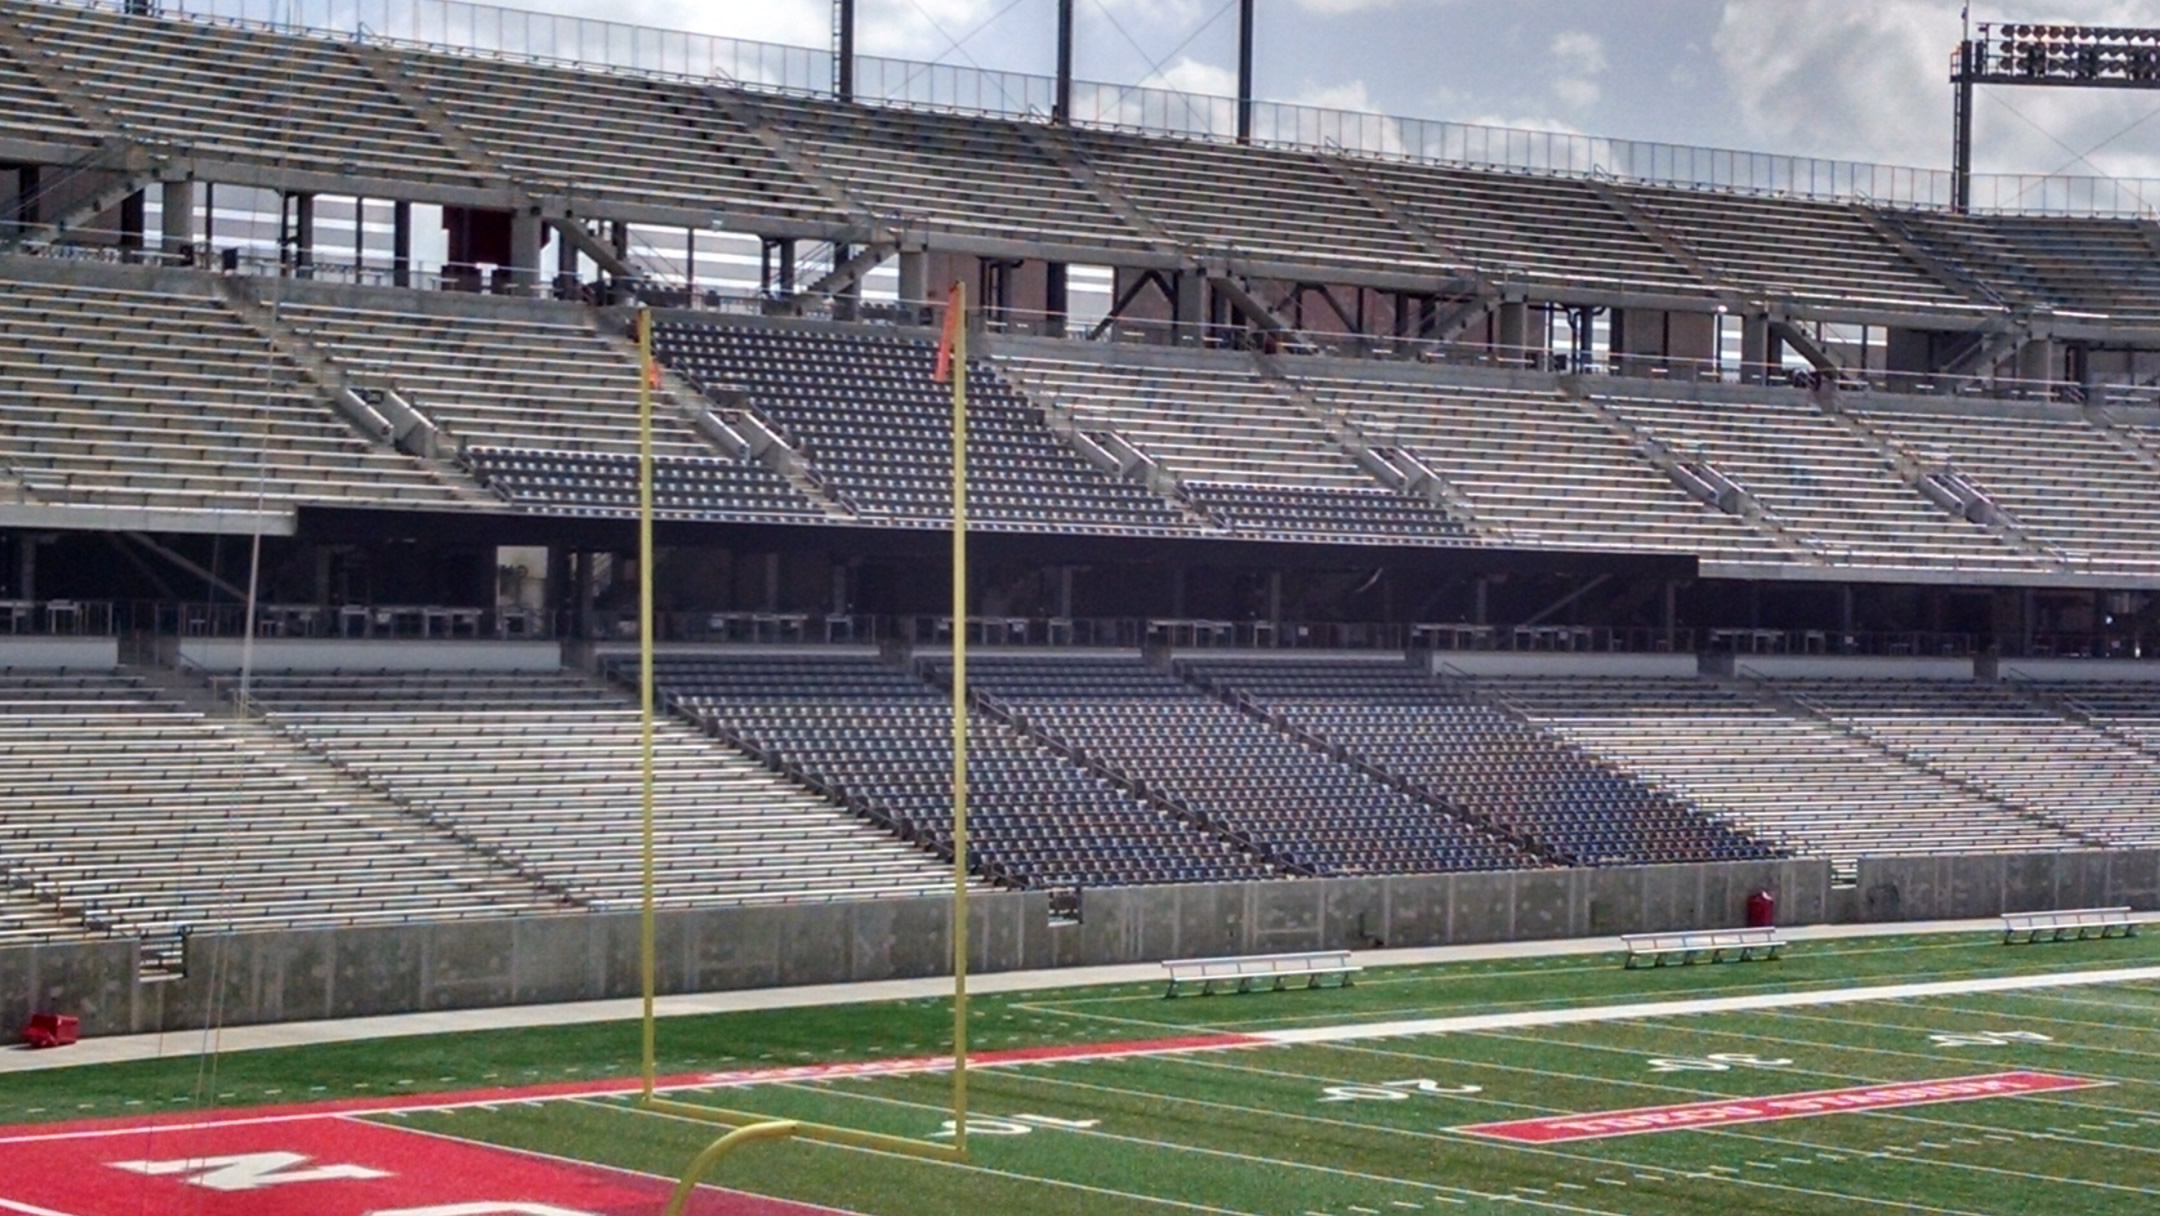 north stands chairback seats